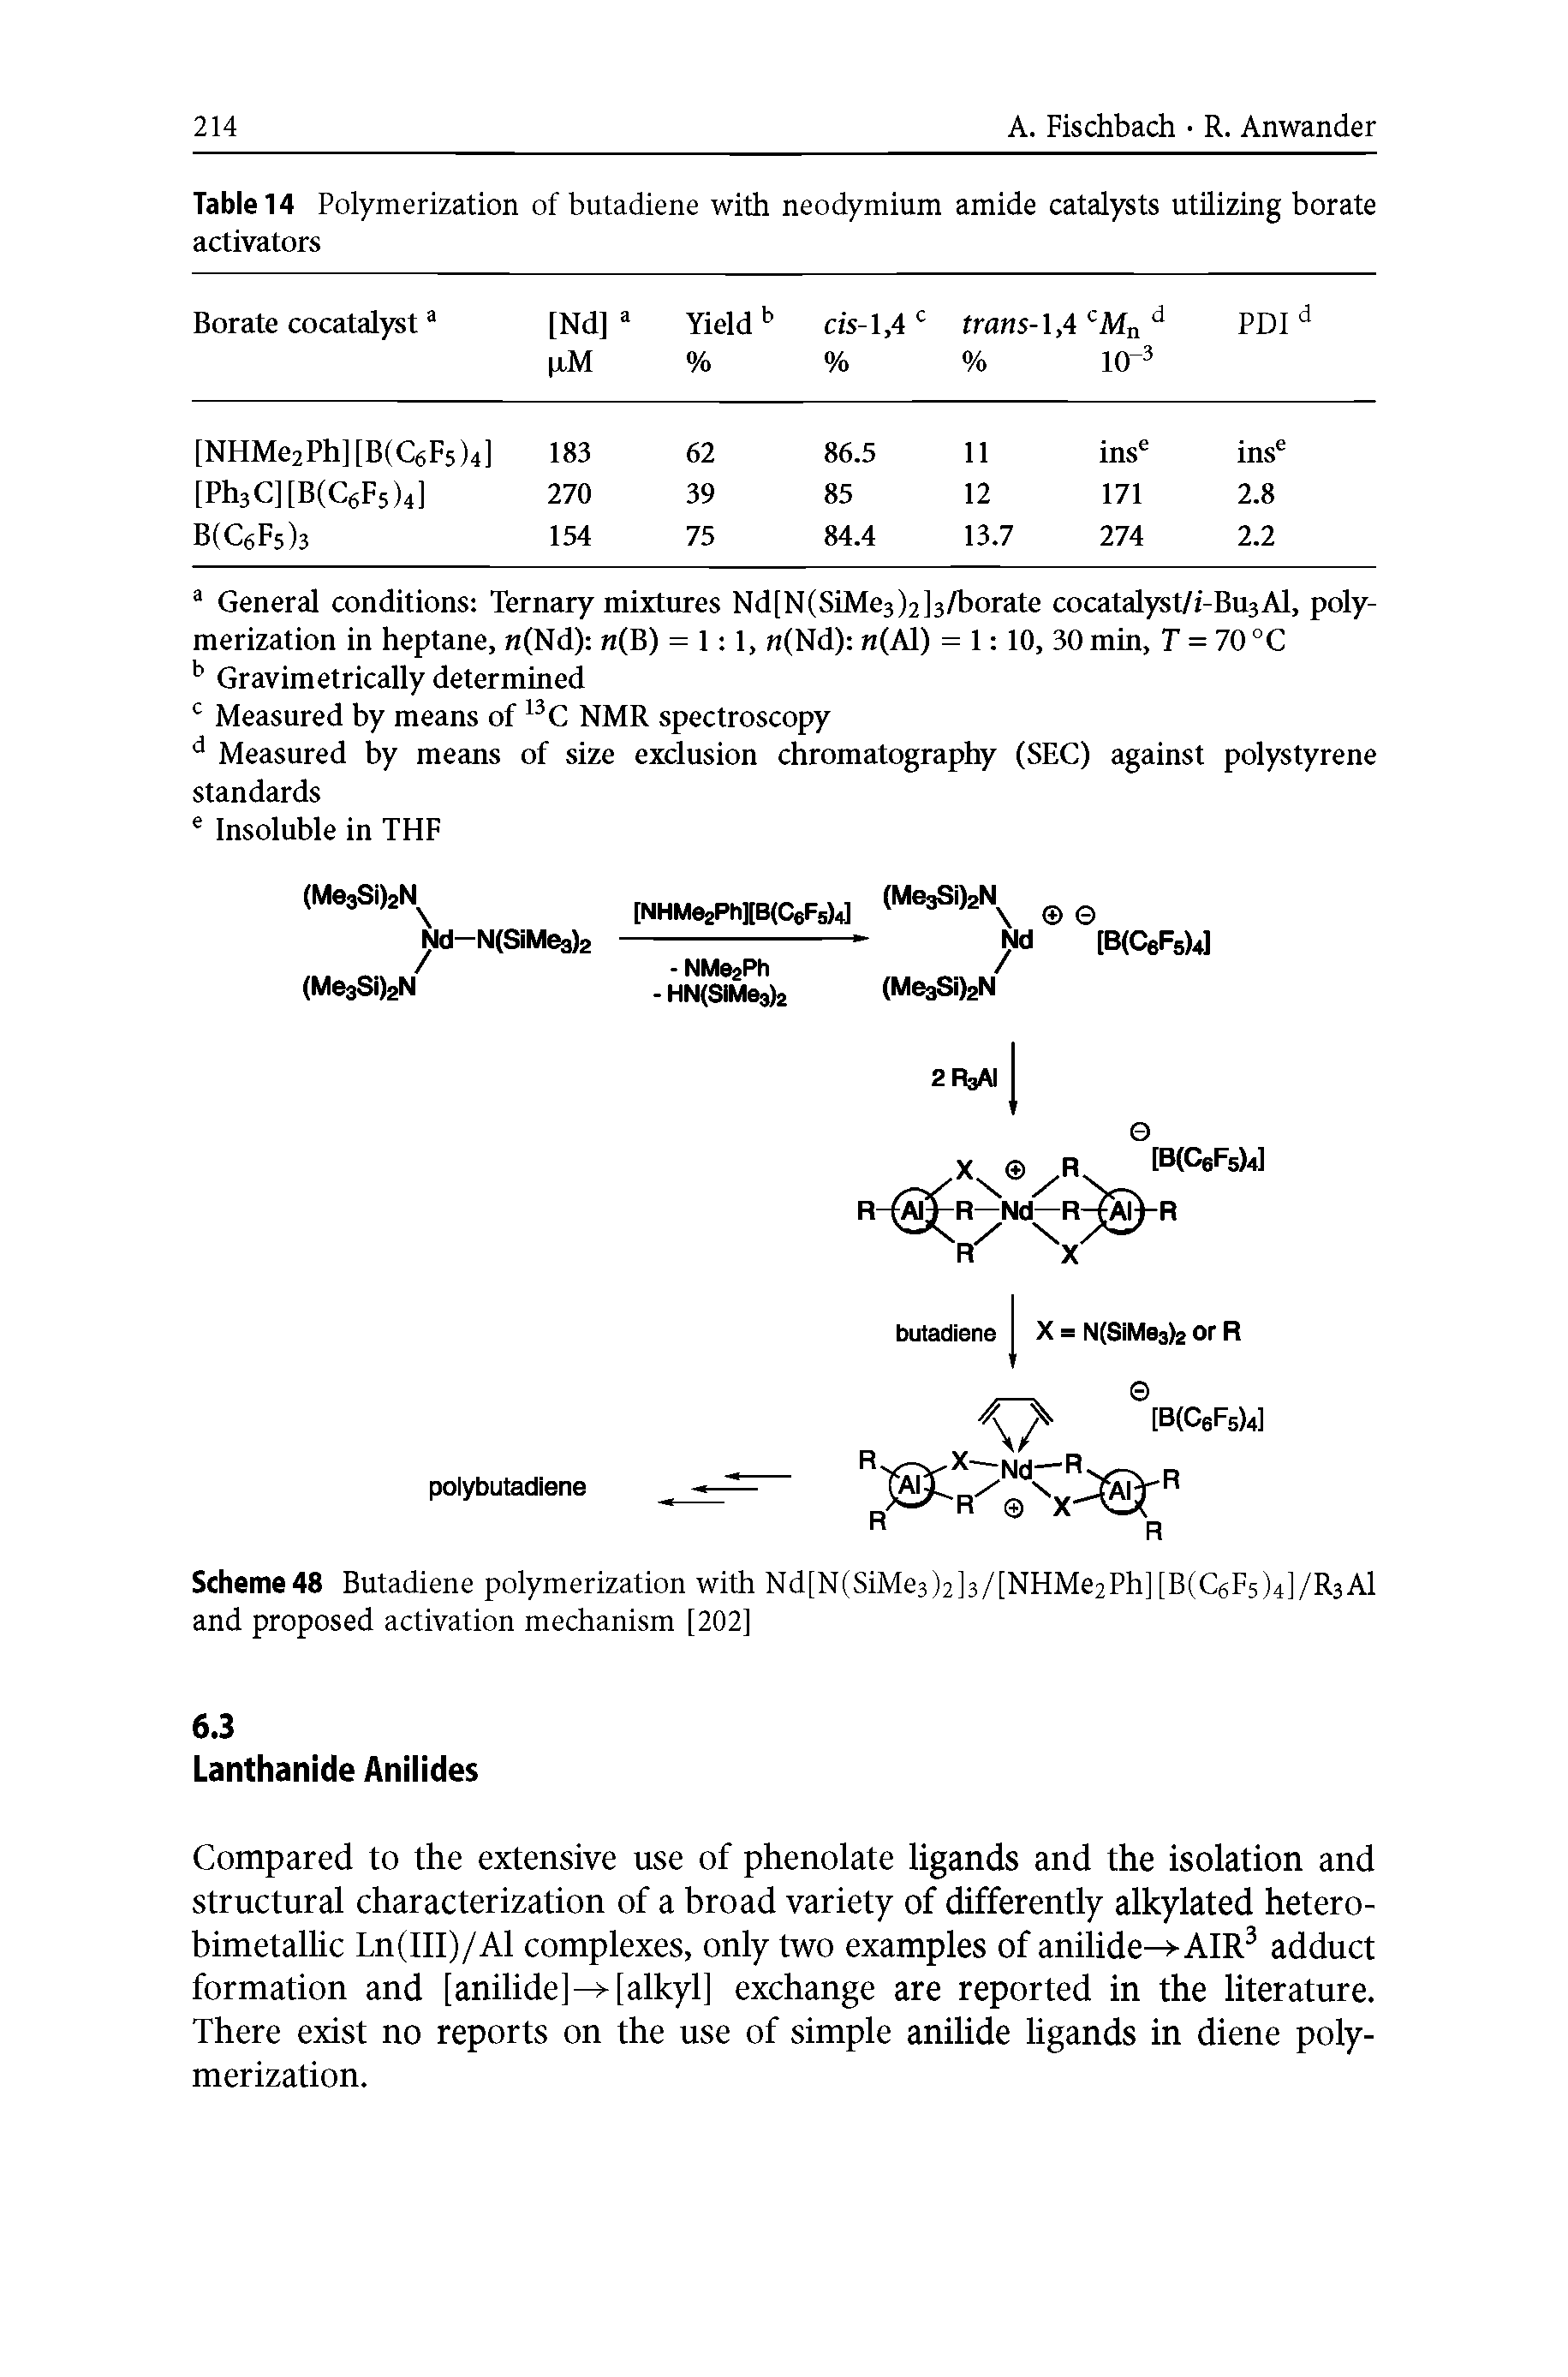 Scheme48 Butadiene polymerization with Nd[N(SiMe3)2]3/[NHMe2Ph] [B(C6F5)4]/R3A1 and proposed activation mechanism [202]...